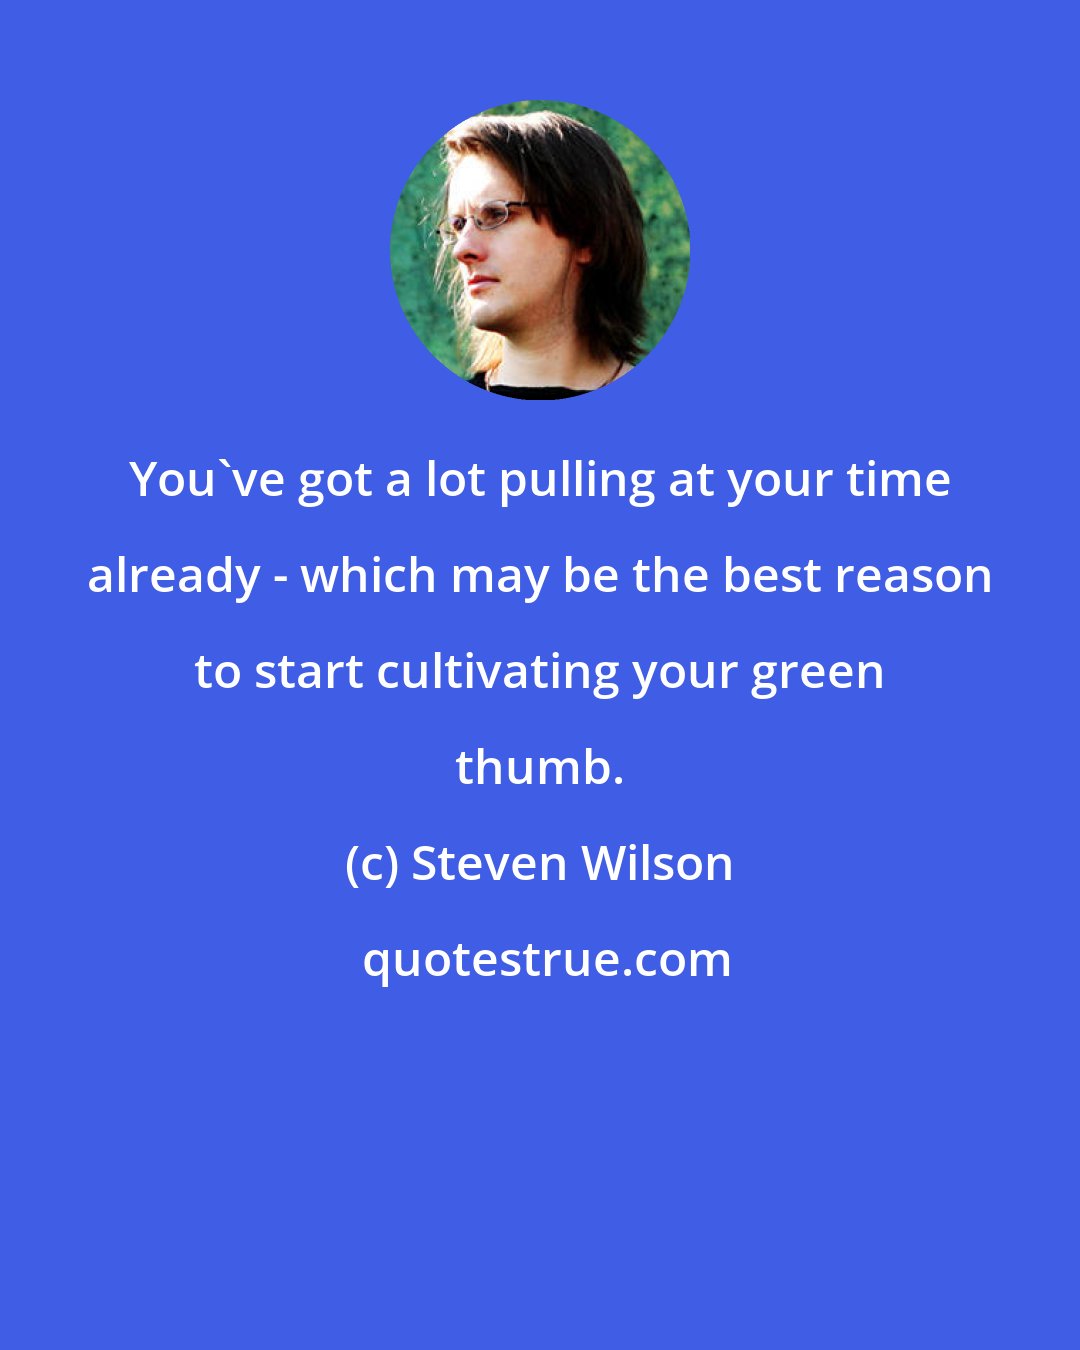 Steven Wilson: You've got a lot pulling at your time already - which may be the best reason to start cultivating your green thumb.